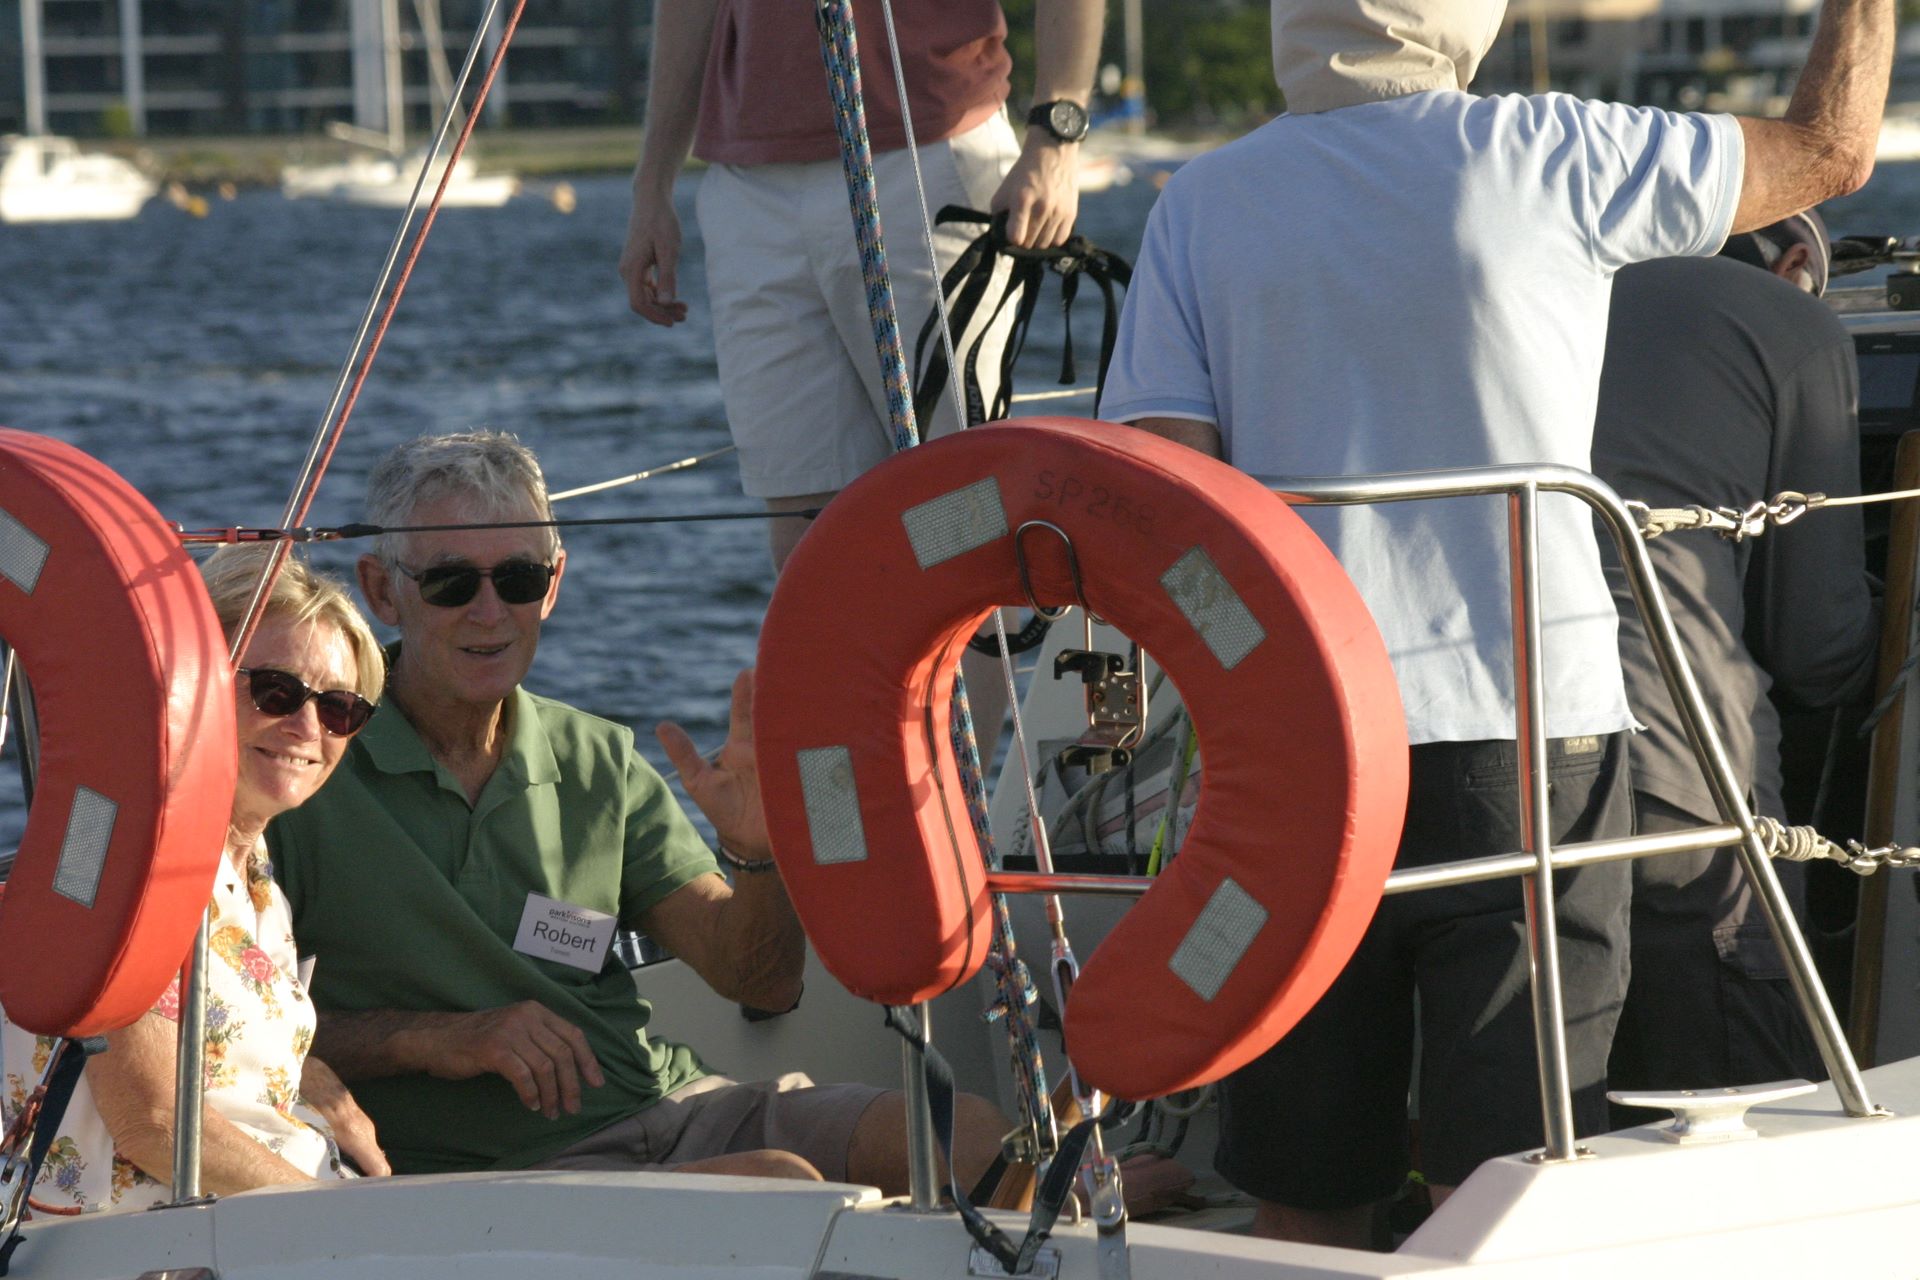 A man and lady smile as they ride in a sailing boat.